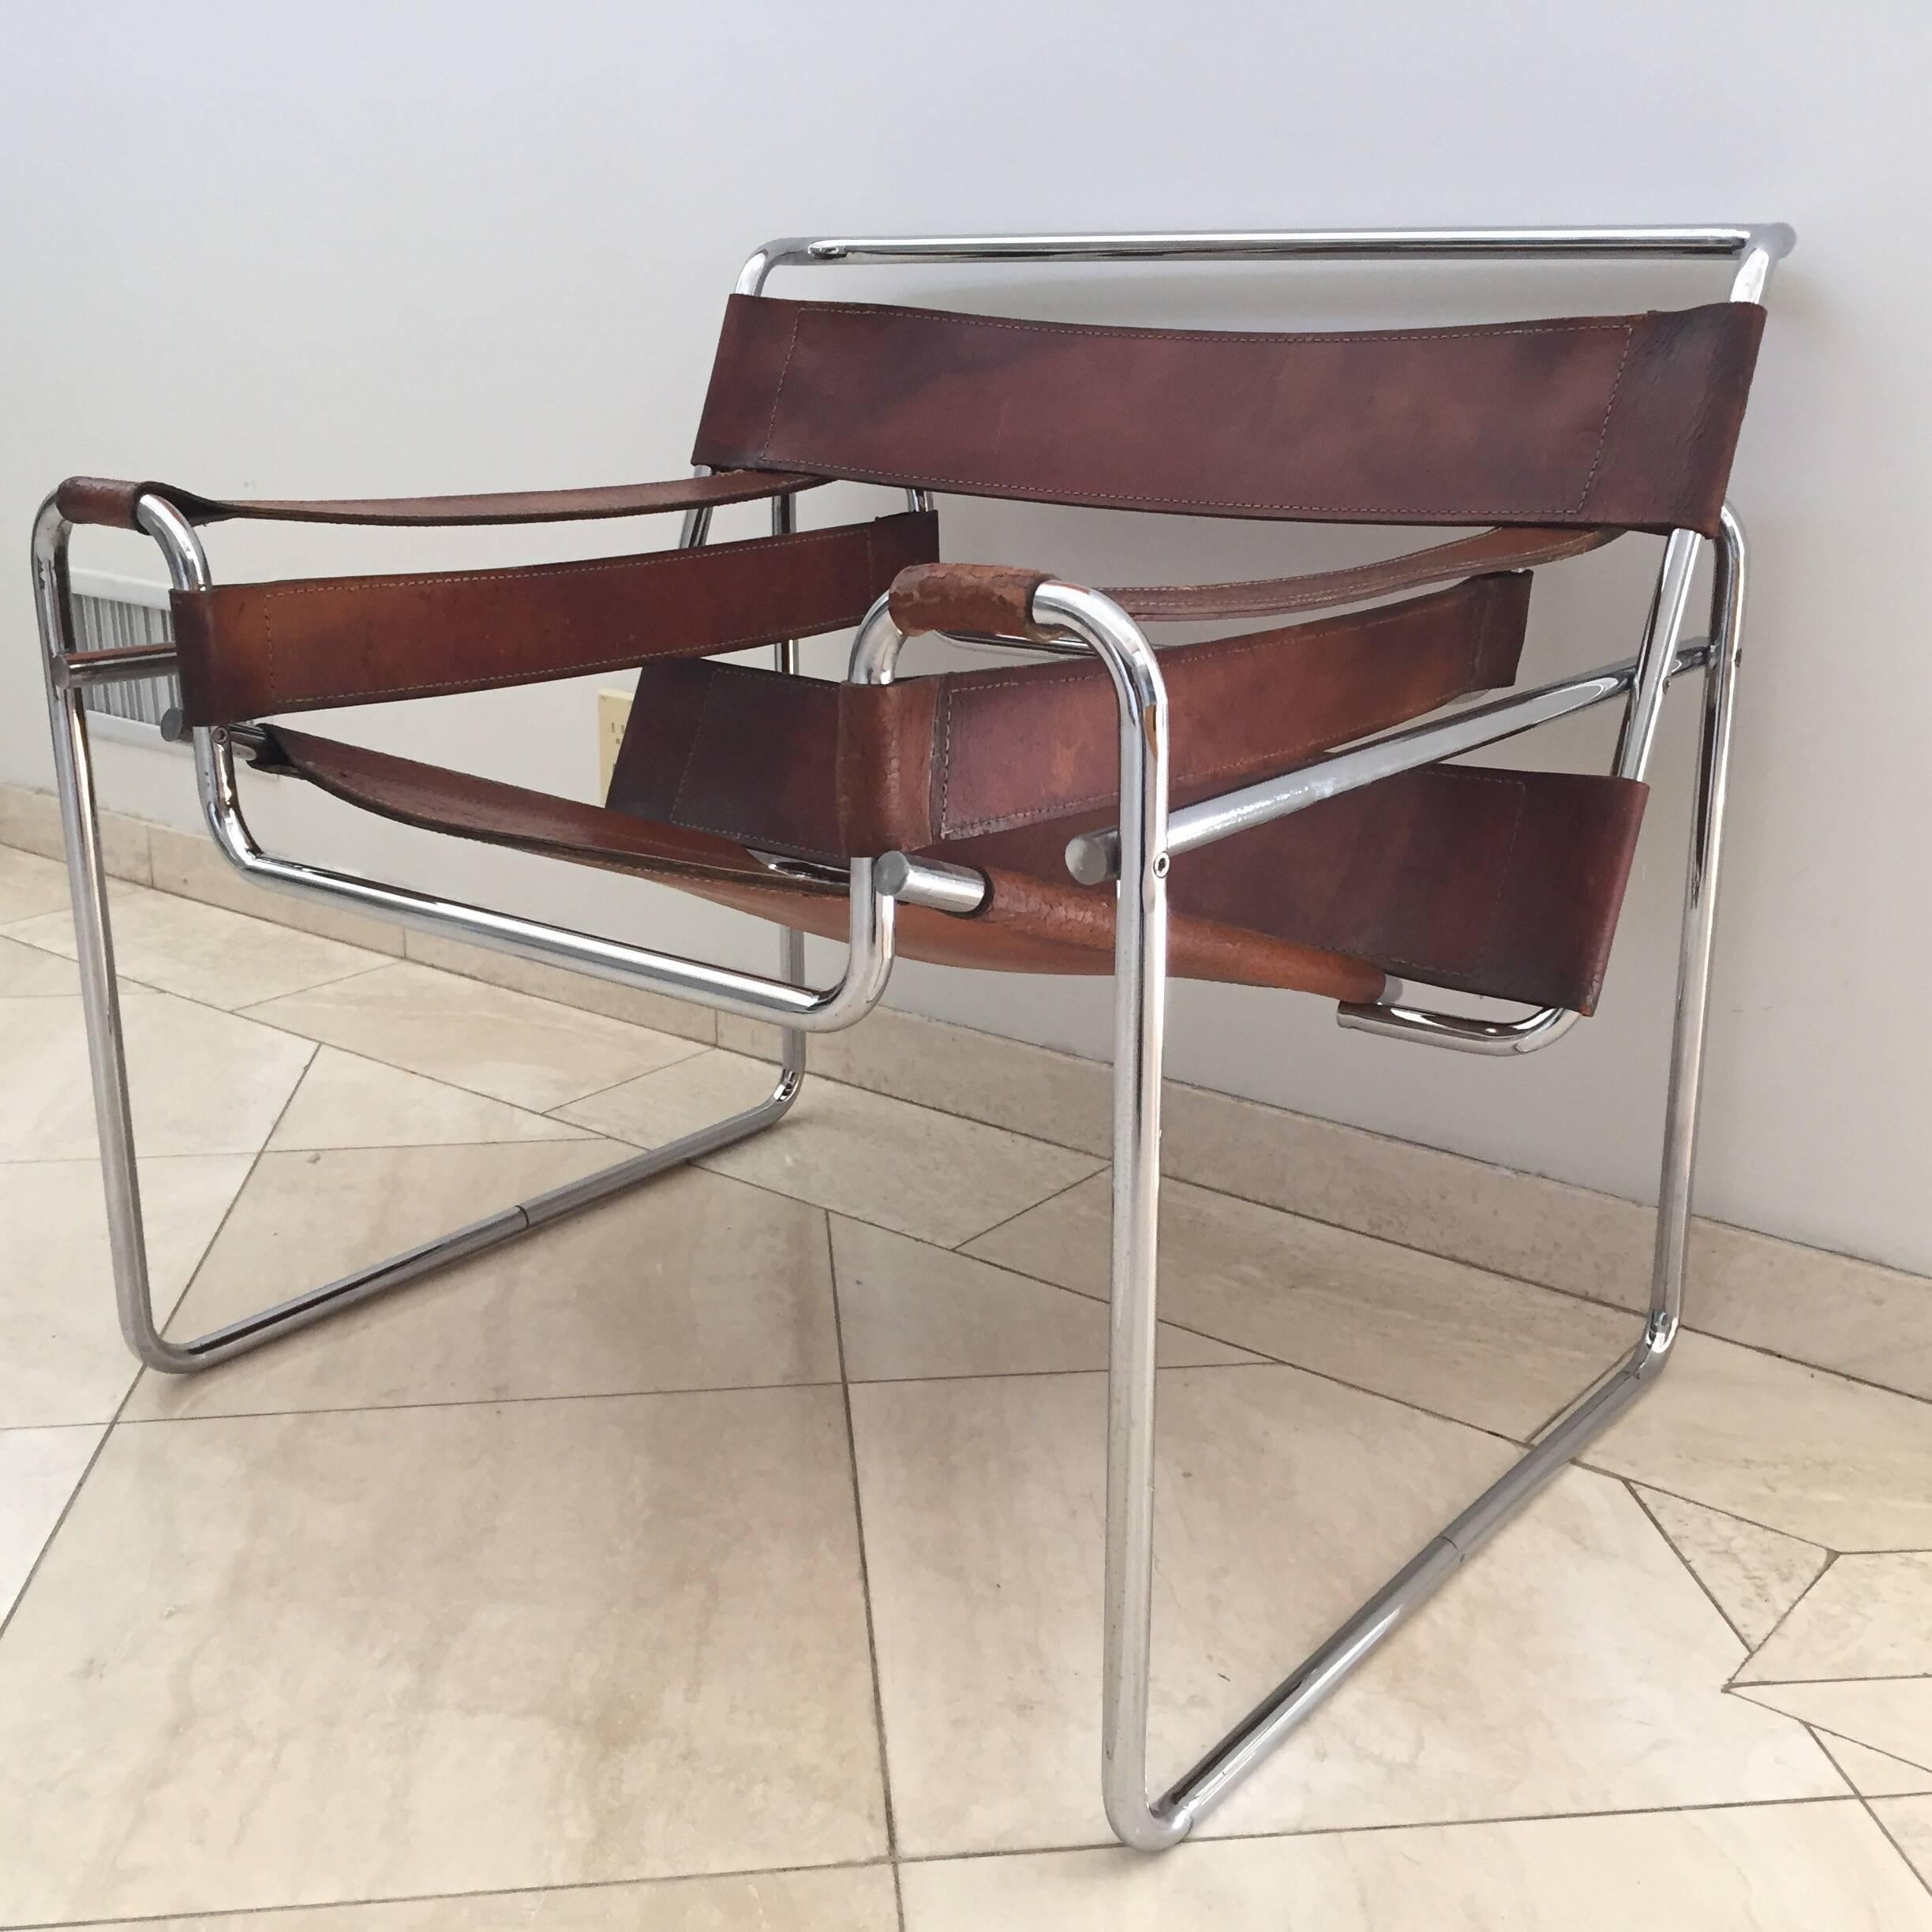 All original Marcel Breuer Wassily chair for Knoll in brown leather straps and tubular frame.
1960s Mid-Century Modern authentic Wassily B3 chair designed by Marcel Breuer and made by Knoll.
The chairs feature the iconic frame shape made of steel